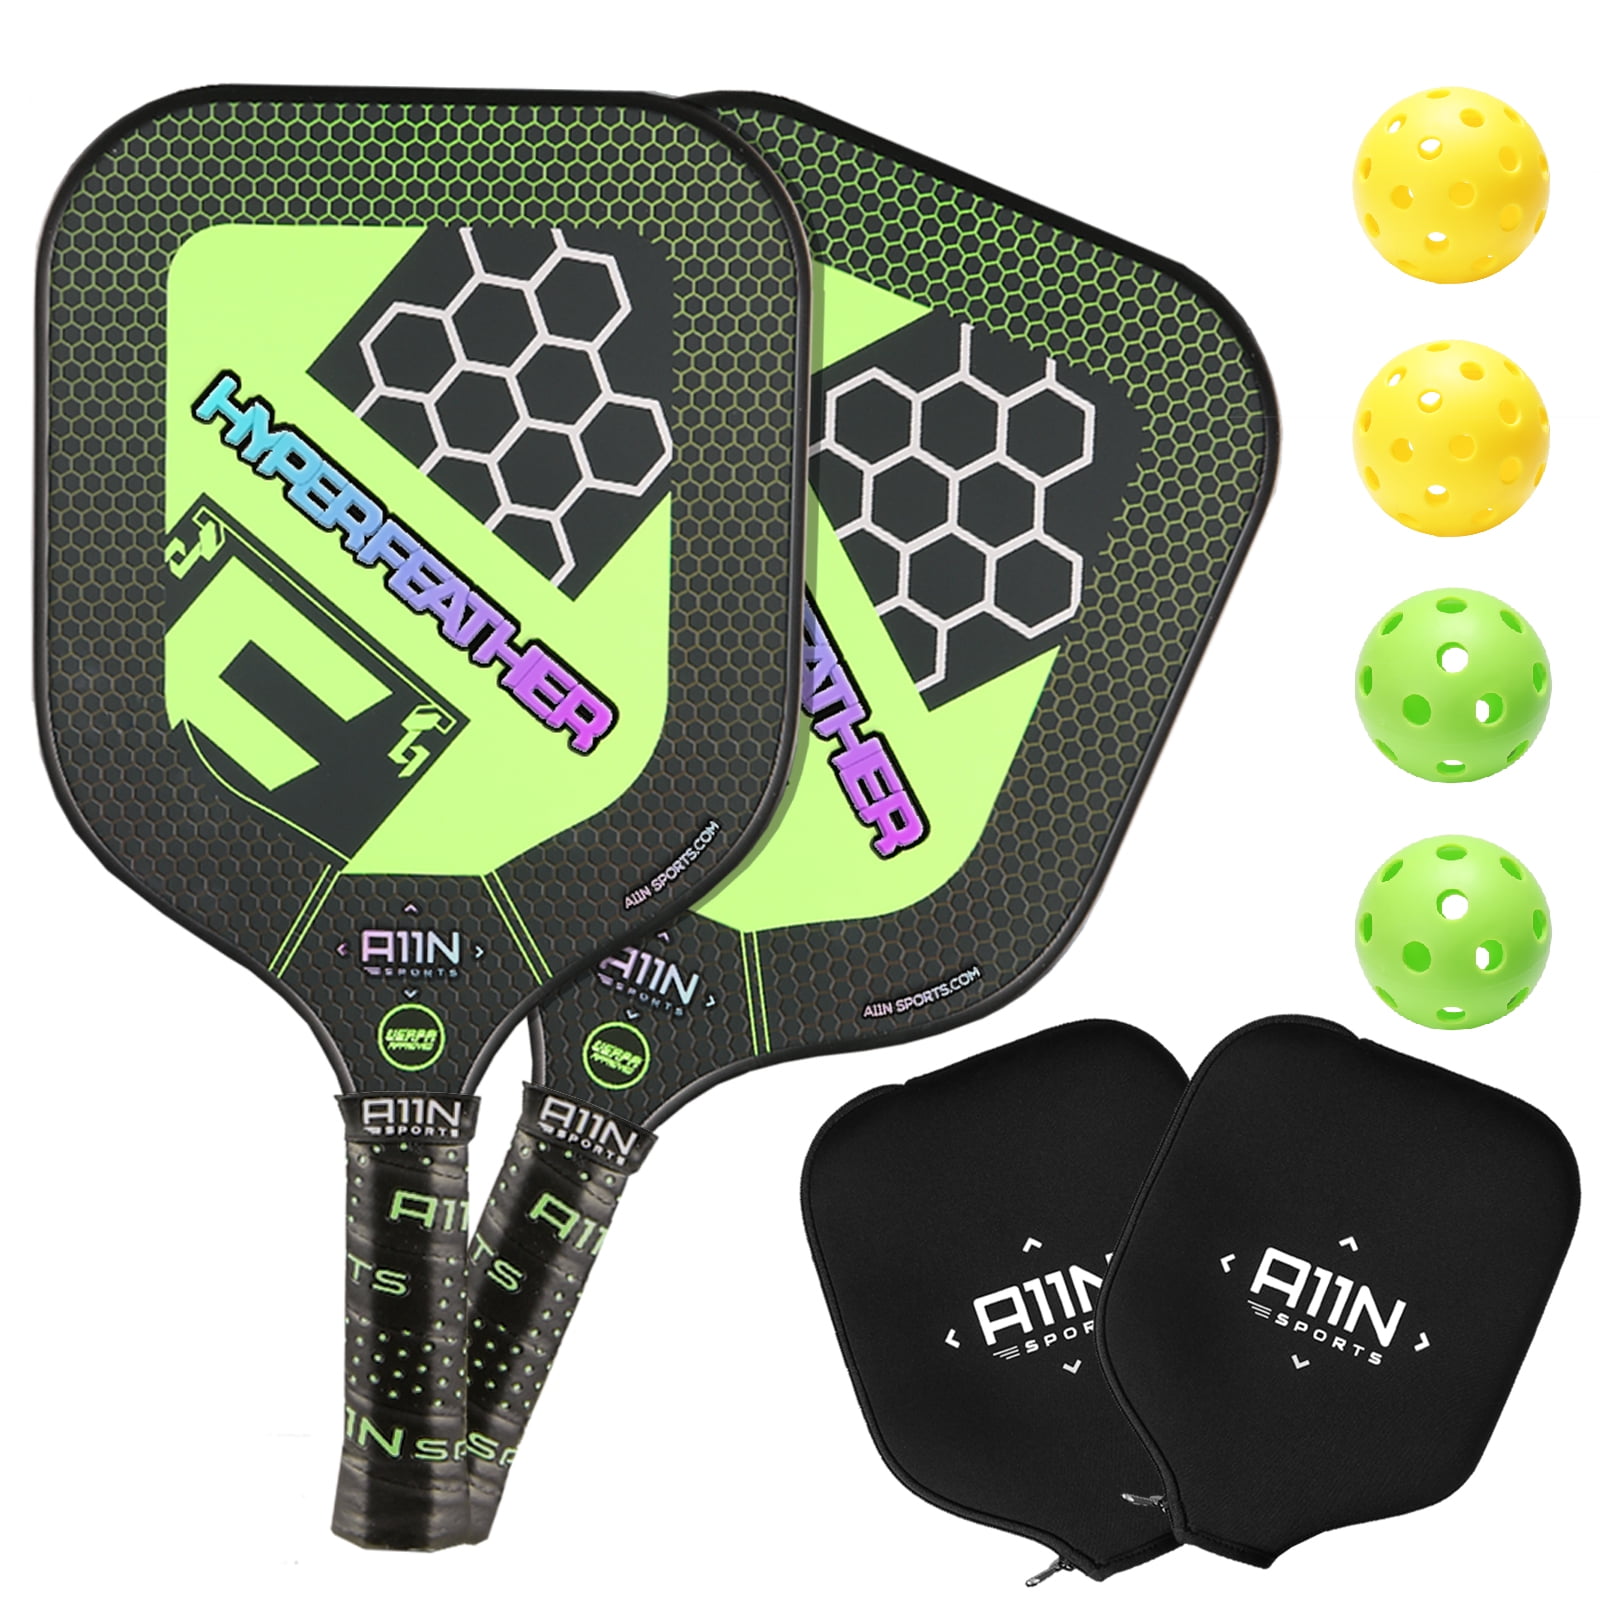 Covers Ultra Cushion Grip & Upgrade Racquet A11N SPORTS A11N Premium Pickleball Paddle Set Drawstring Bag Overgrips Durable Balls Graphite Face and Honeycombed Polymer Core Paddles 